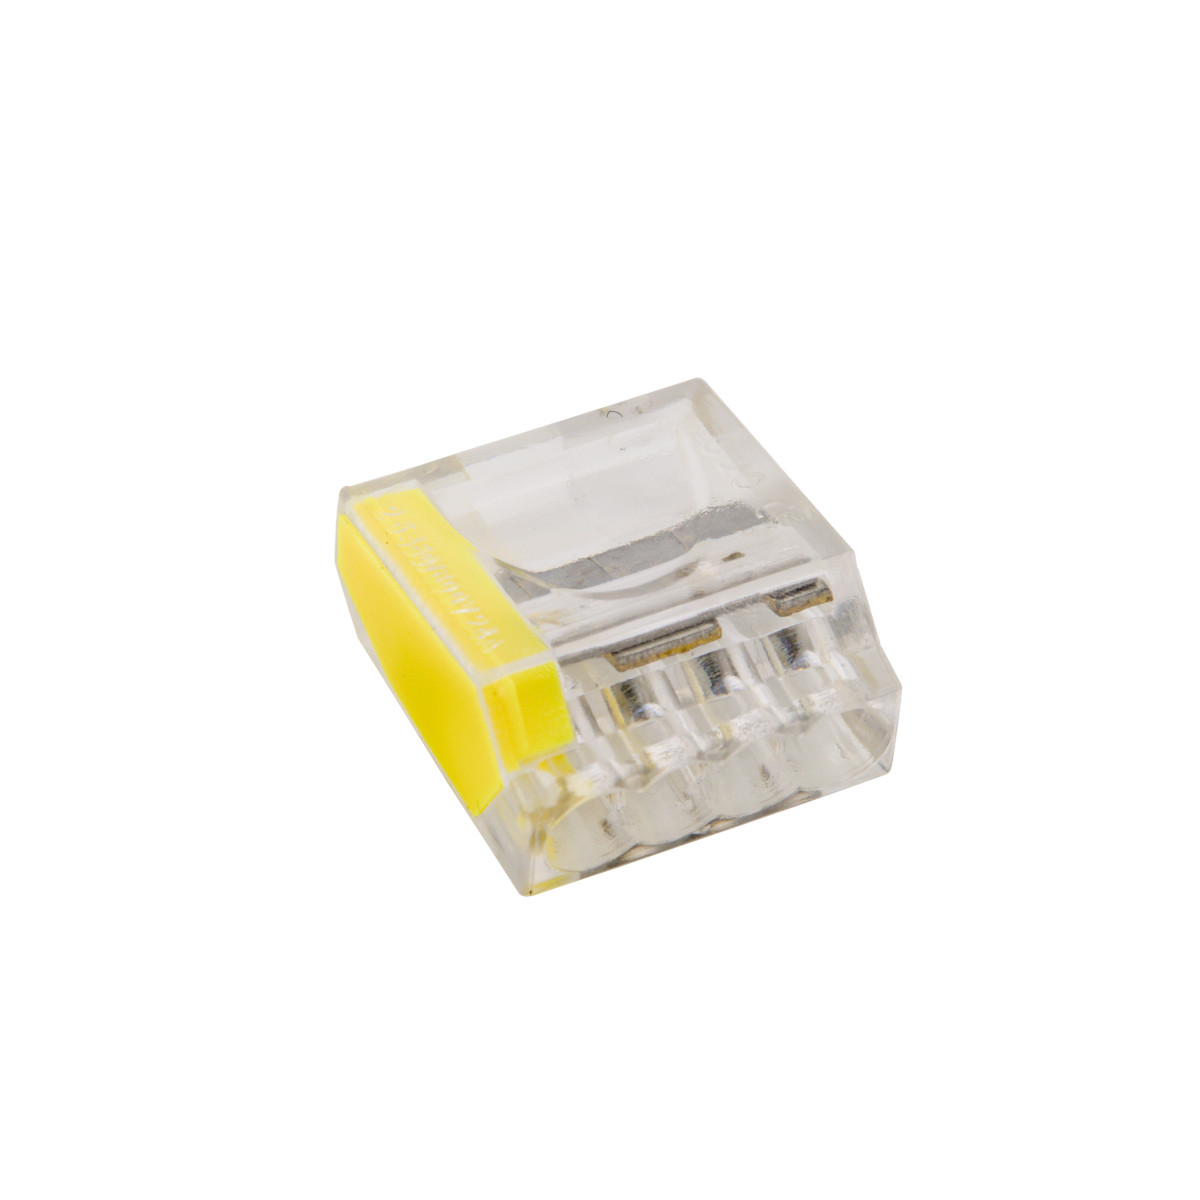 4-conductor connection terminal block [0.75 to 2.5mm]